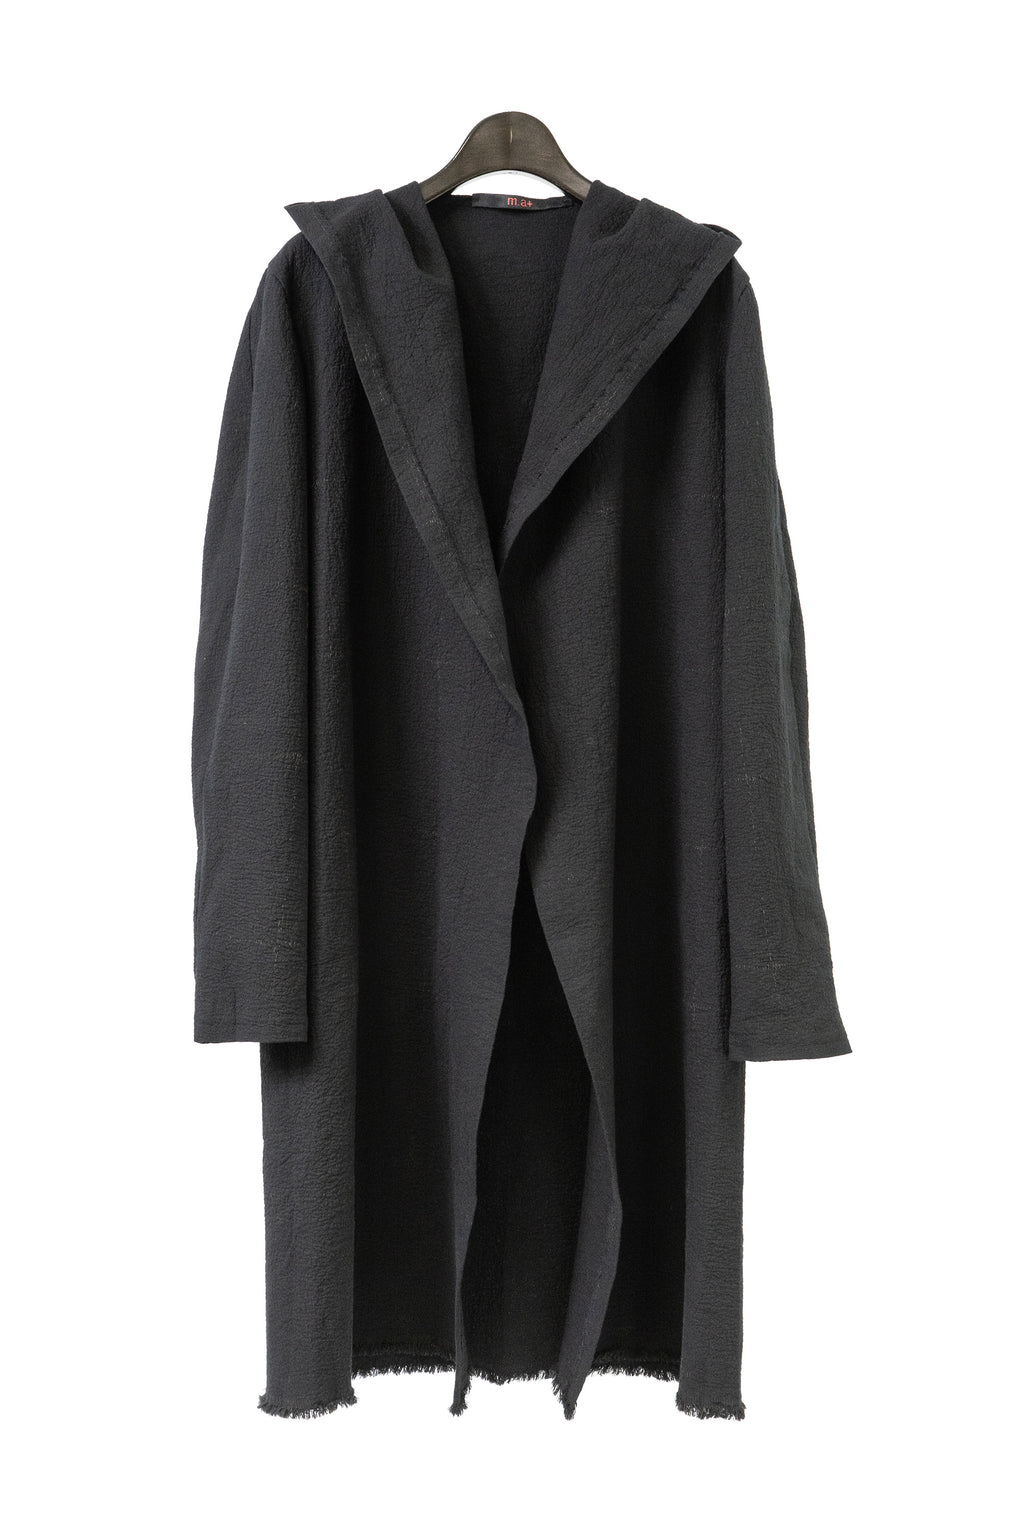 m.a+/C328 CDG hooded unlined cardigan – boutiqueW